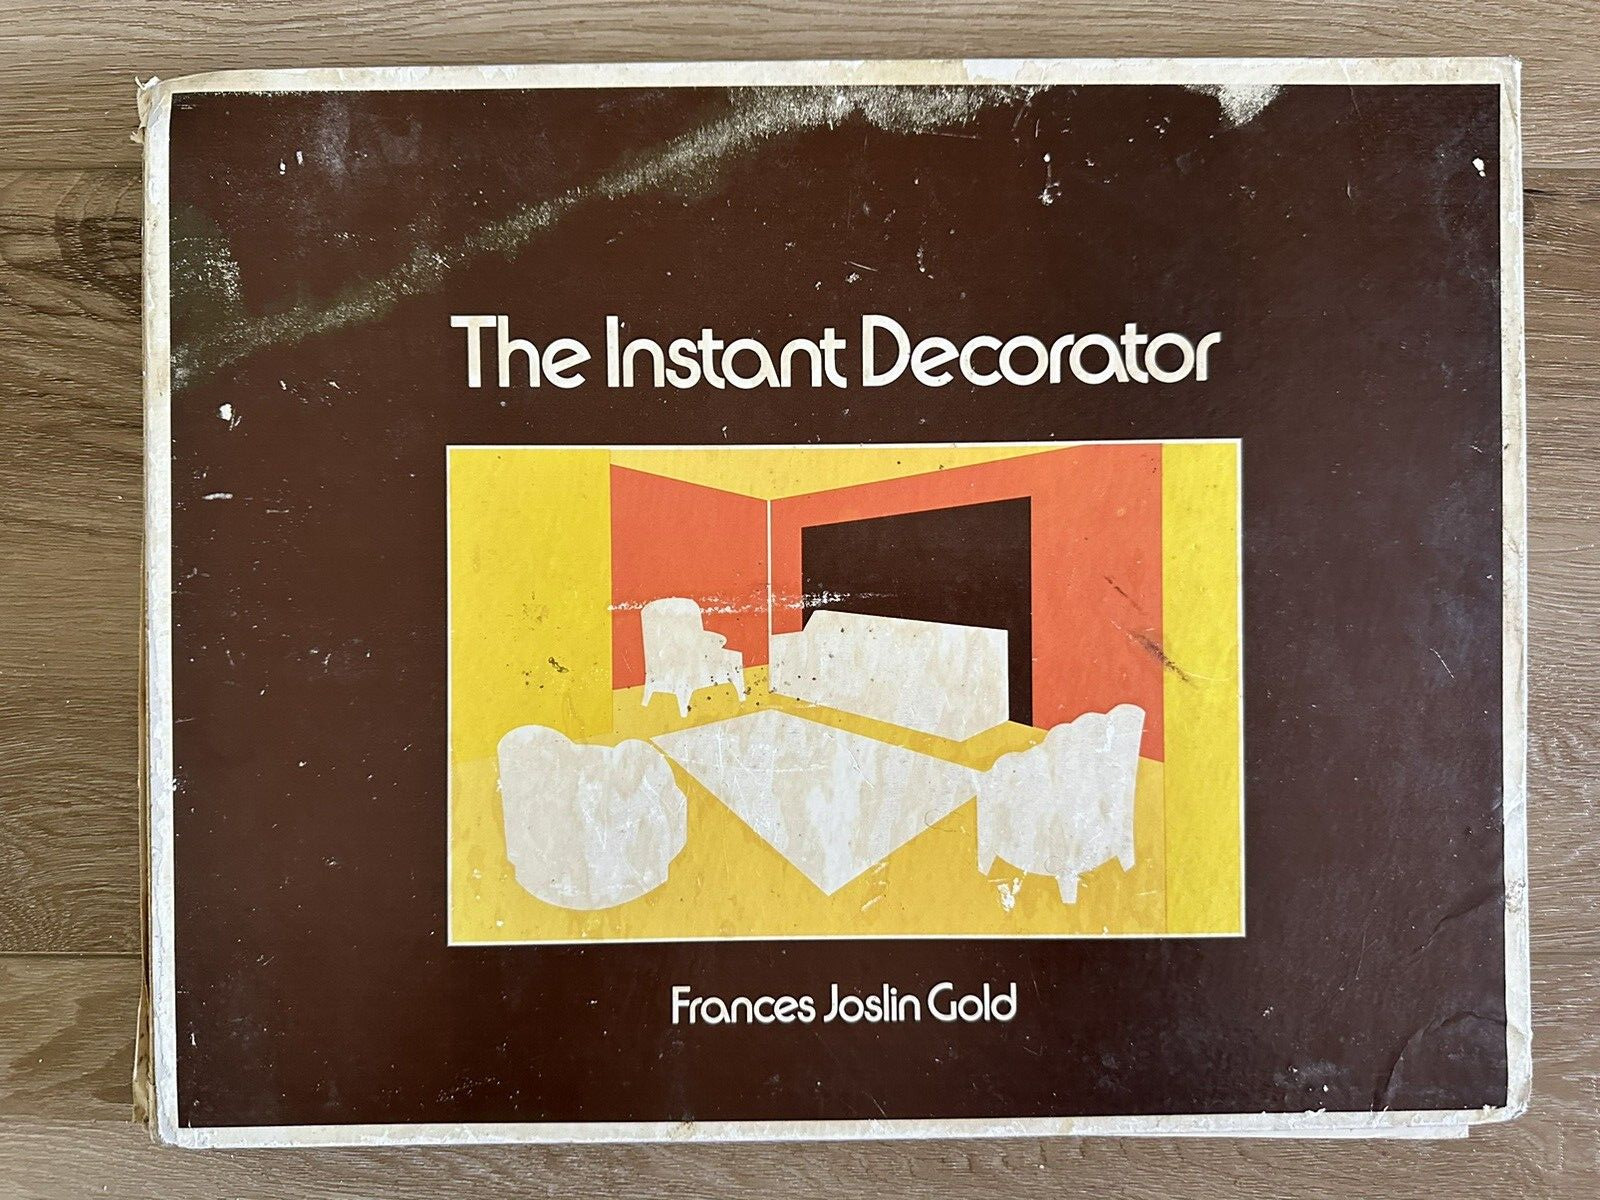 Vtg 1976 THE INSTANT DECORATOR By Frances Joslin Gold Book with Transparencies